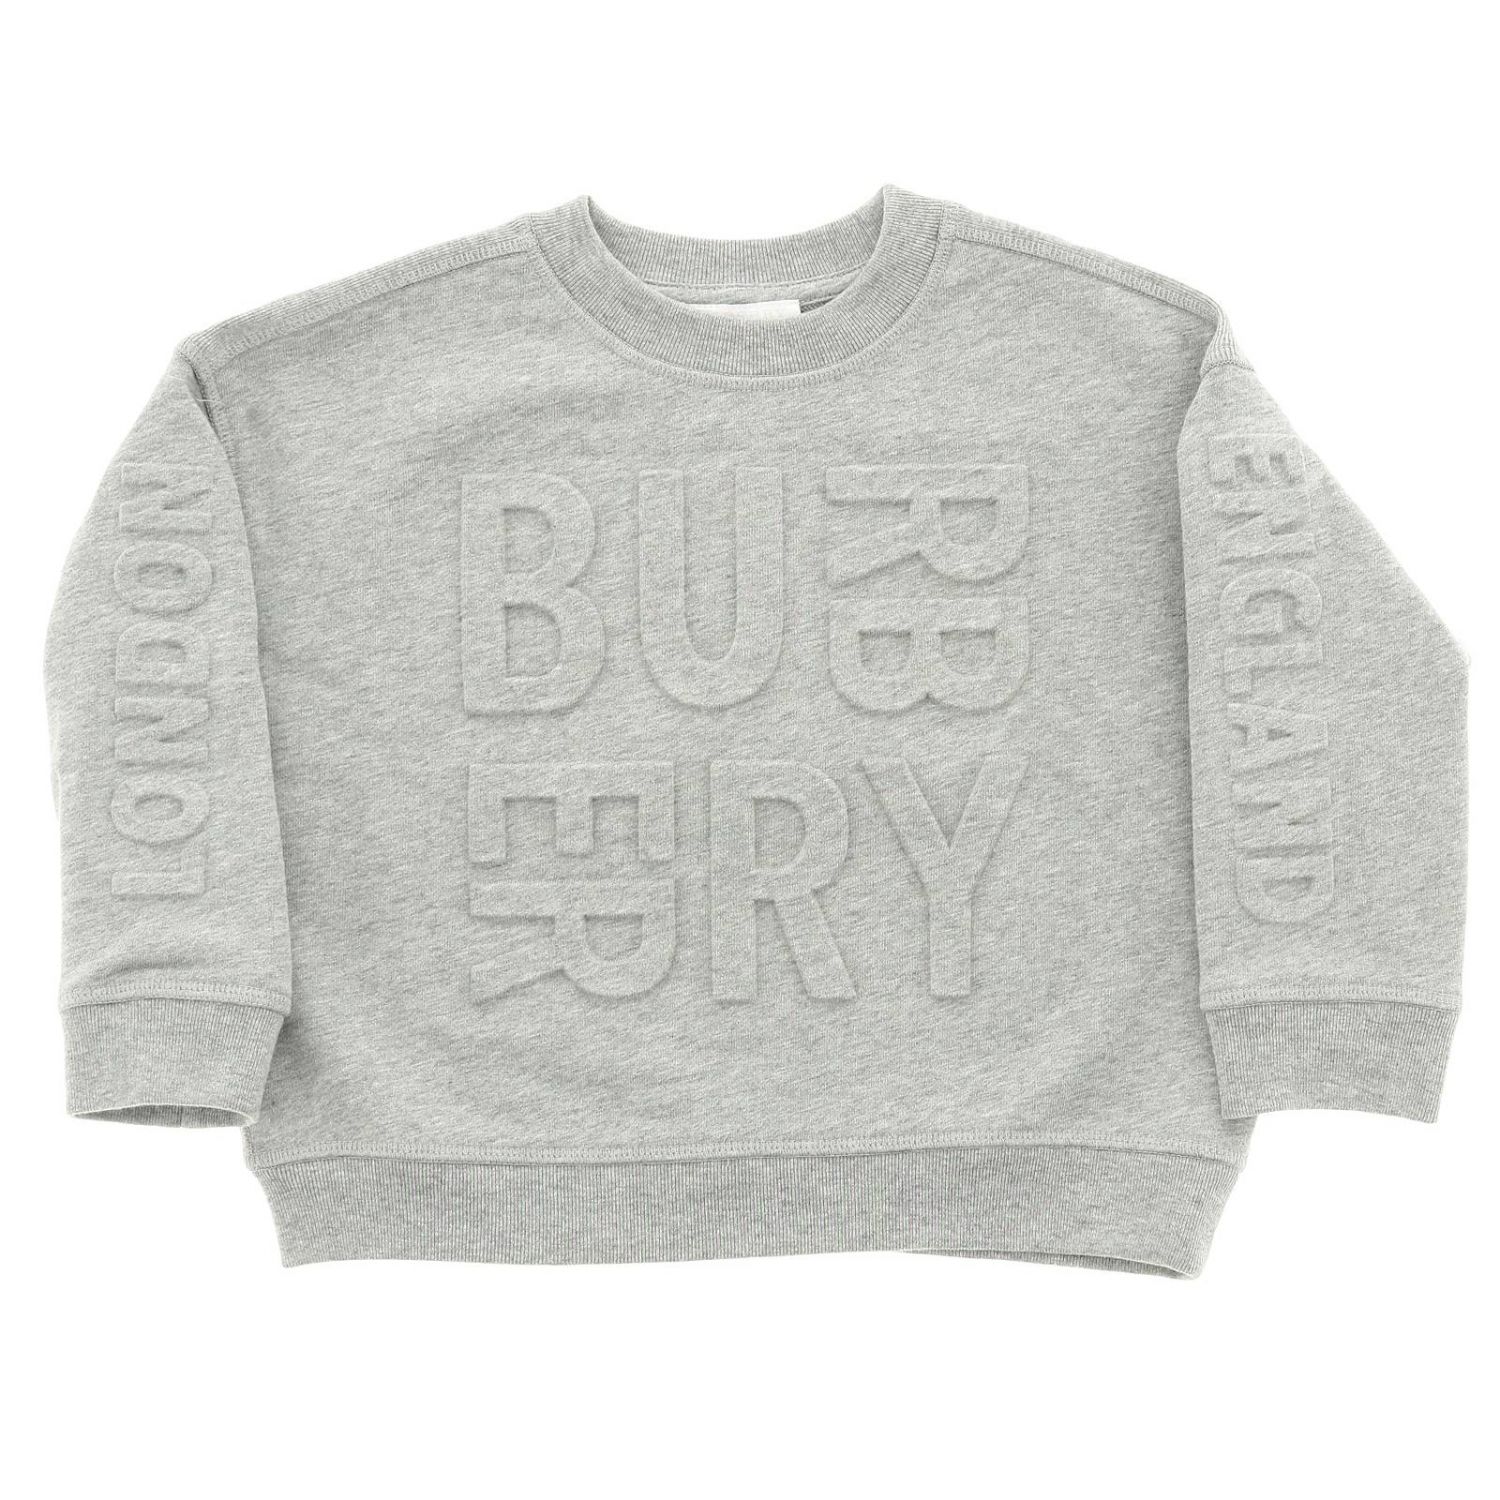 Burberry Outlet: Sweater kids - Grey | Burberry sweater 8006314 online ...